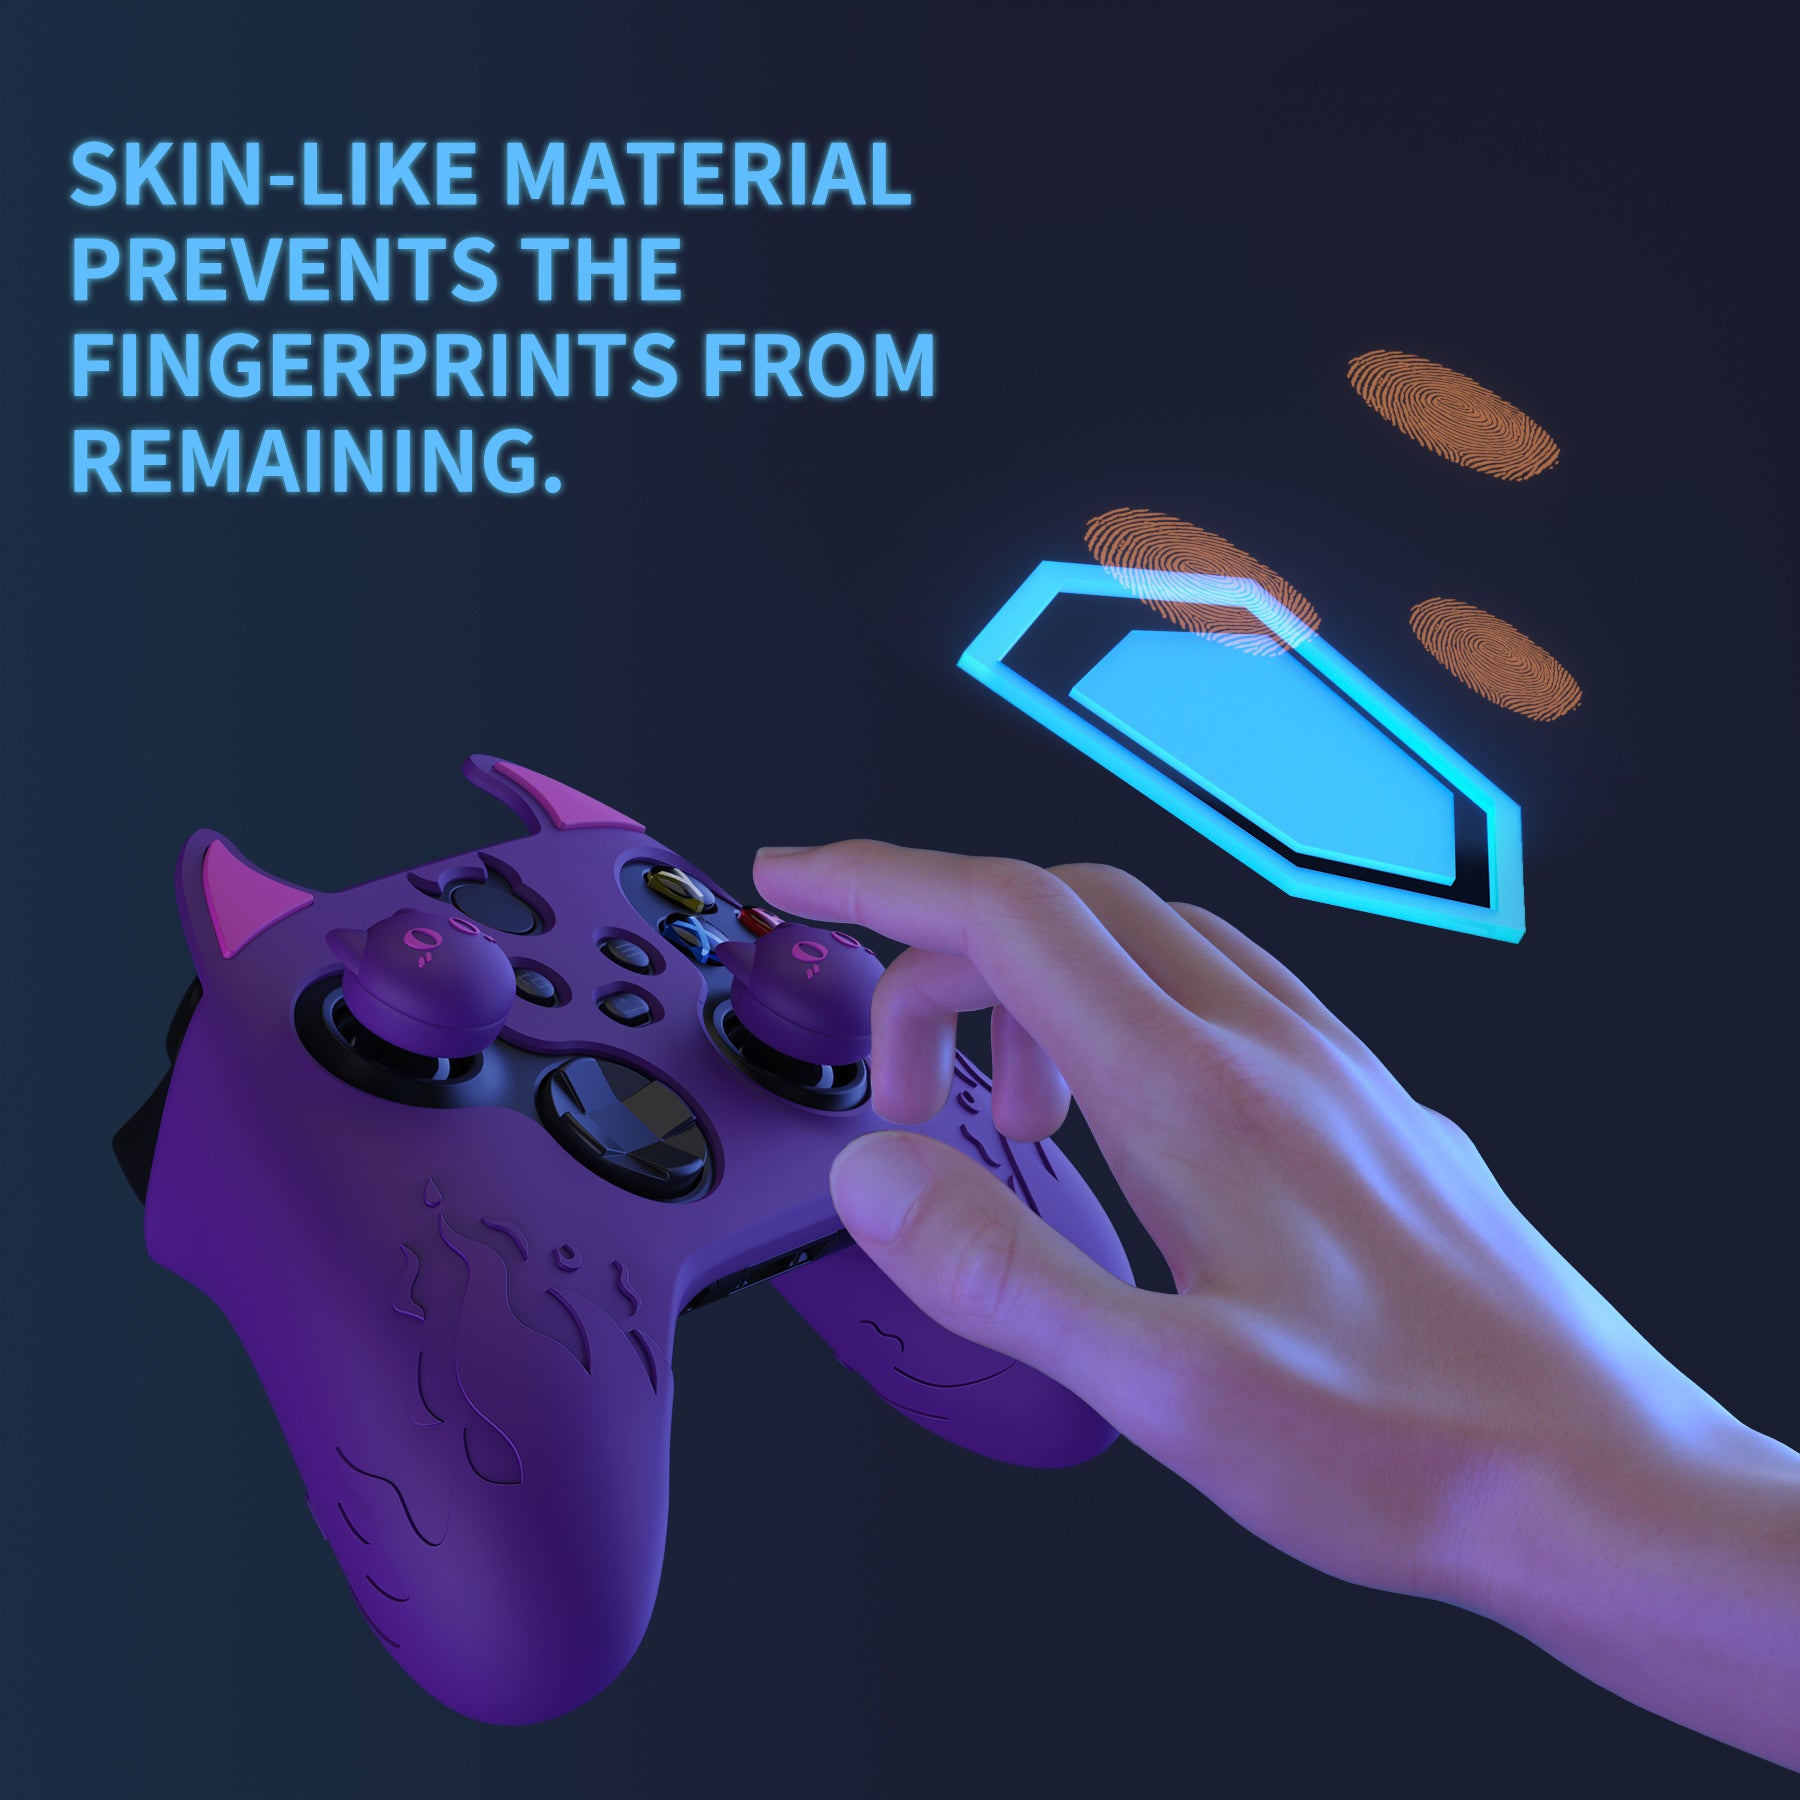 PlayVital Cute Demon Silicone Cover with Thumb Grip Caps for Xbox Series X/S Controller & Xbox Core Wireless Controller - Purple - PUKX3P003 PlayVital